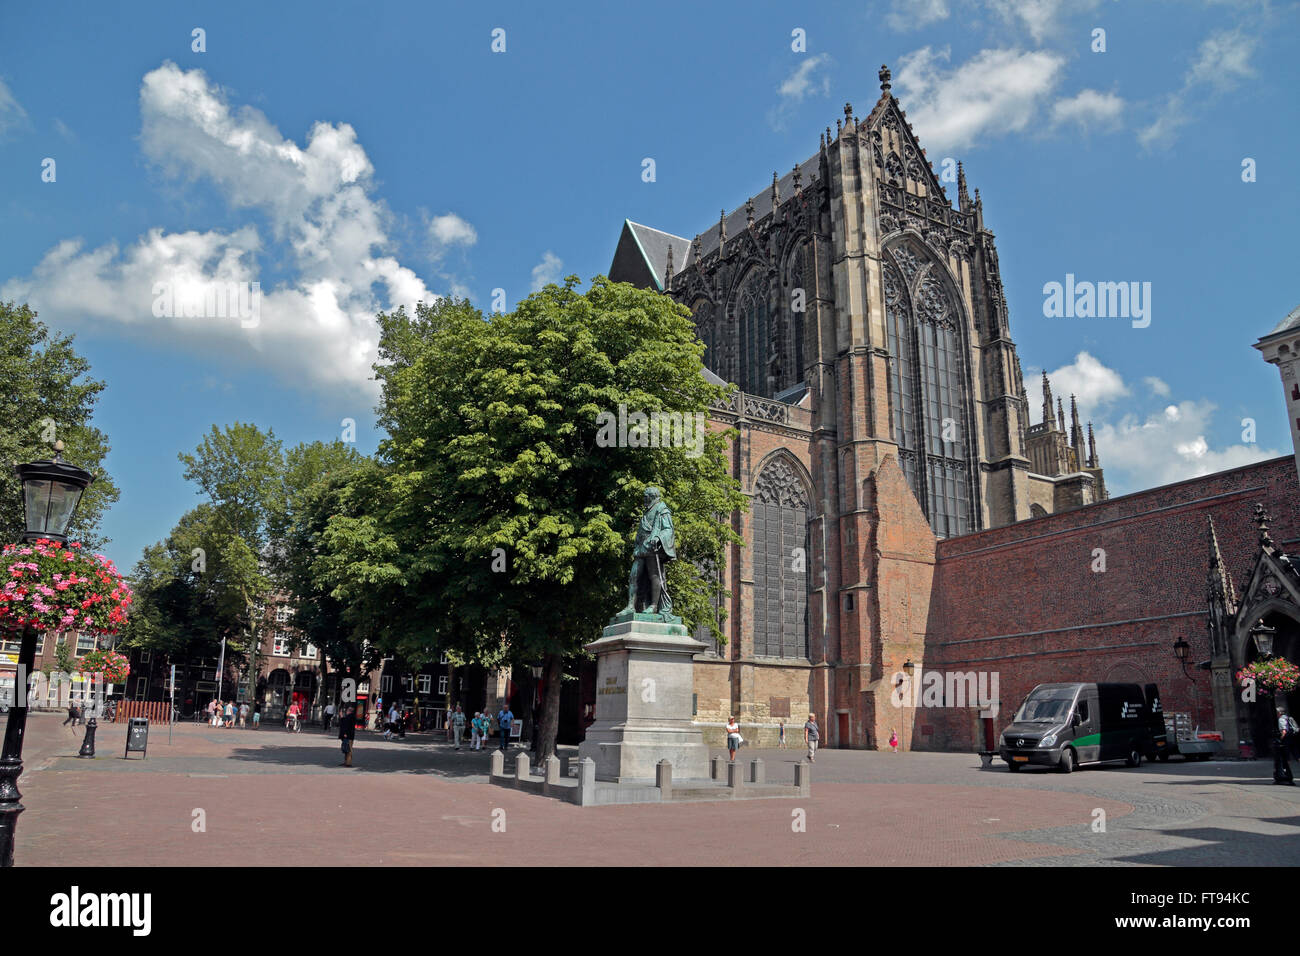 St. Martin's Cathedral, or Dom Church (in Dutch, Domkerk) in Utrecht, Netherlands. Stock Photo